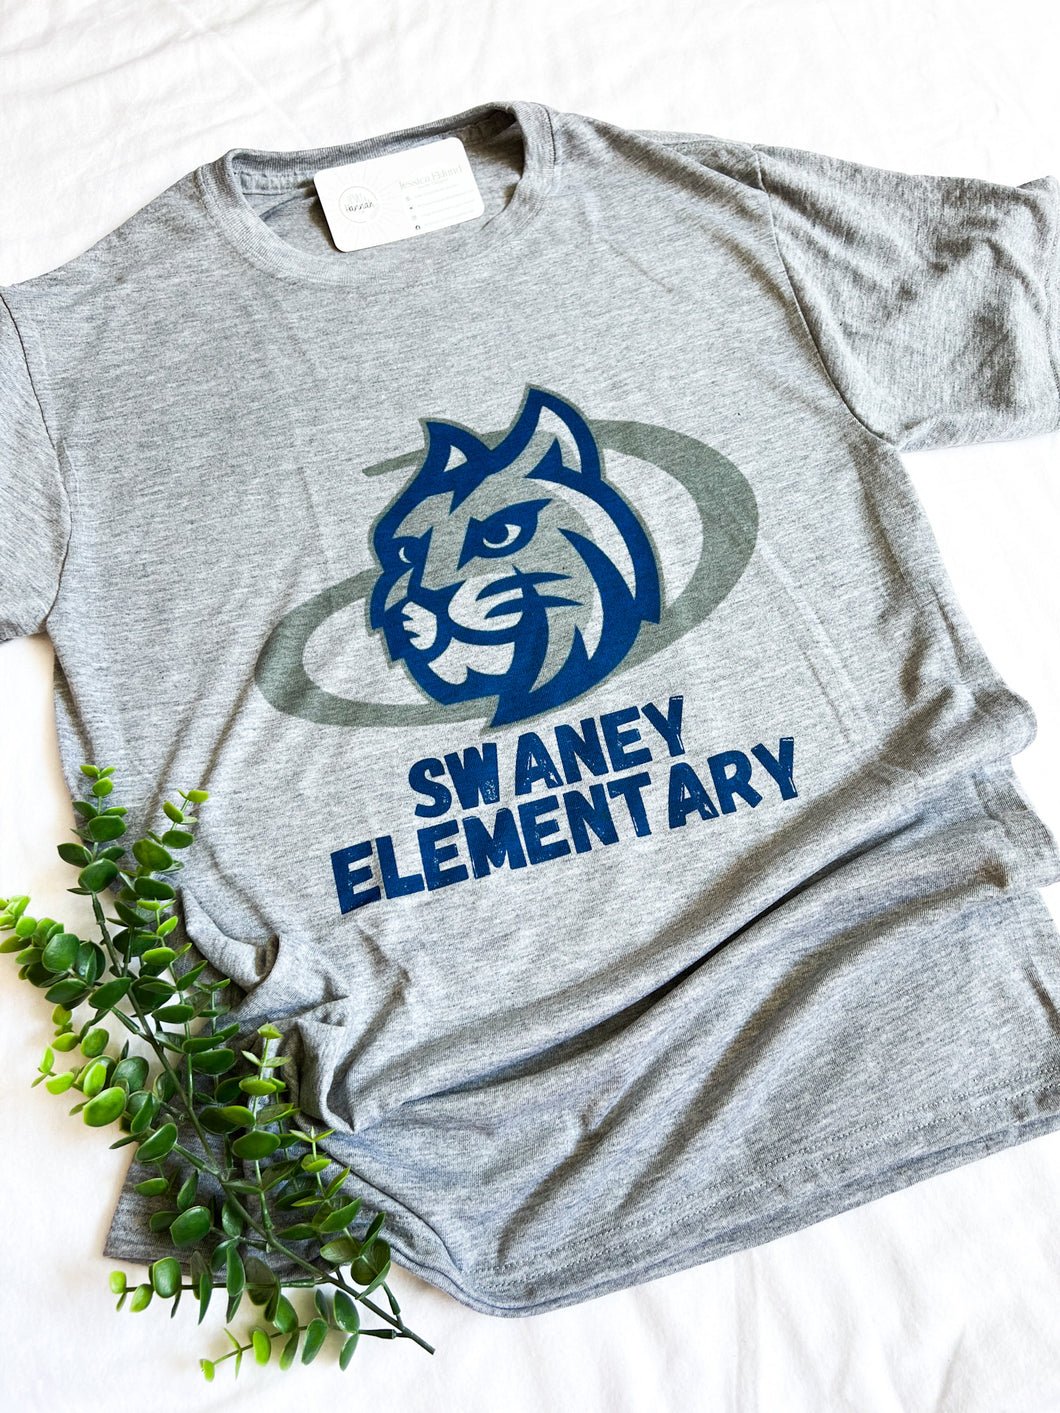 14 - Swaney Elementary no Paws T-Shirt